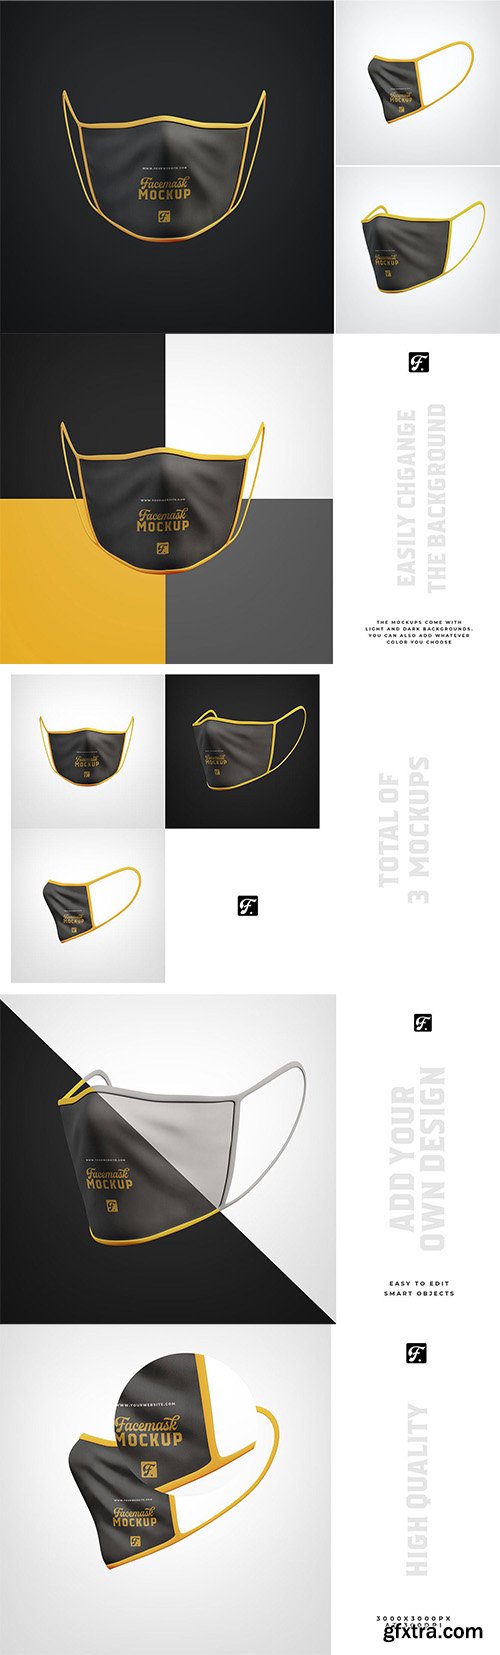 Anti Pollution Face Mask Mockups